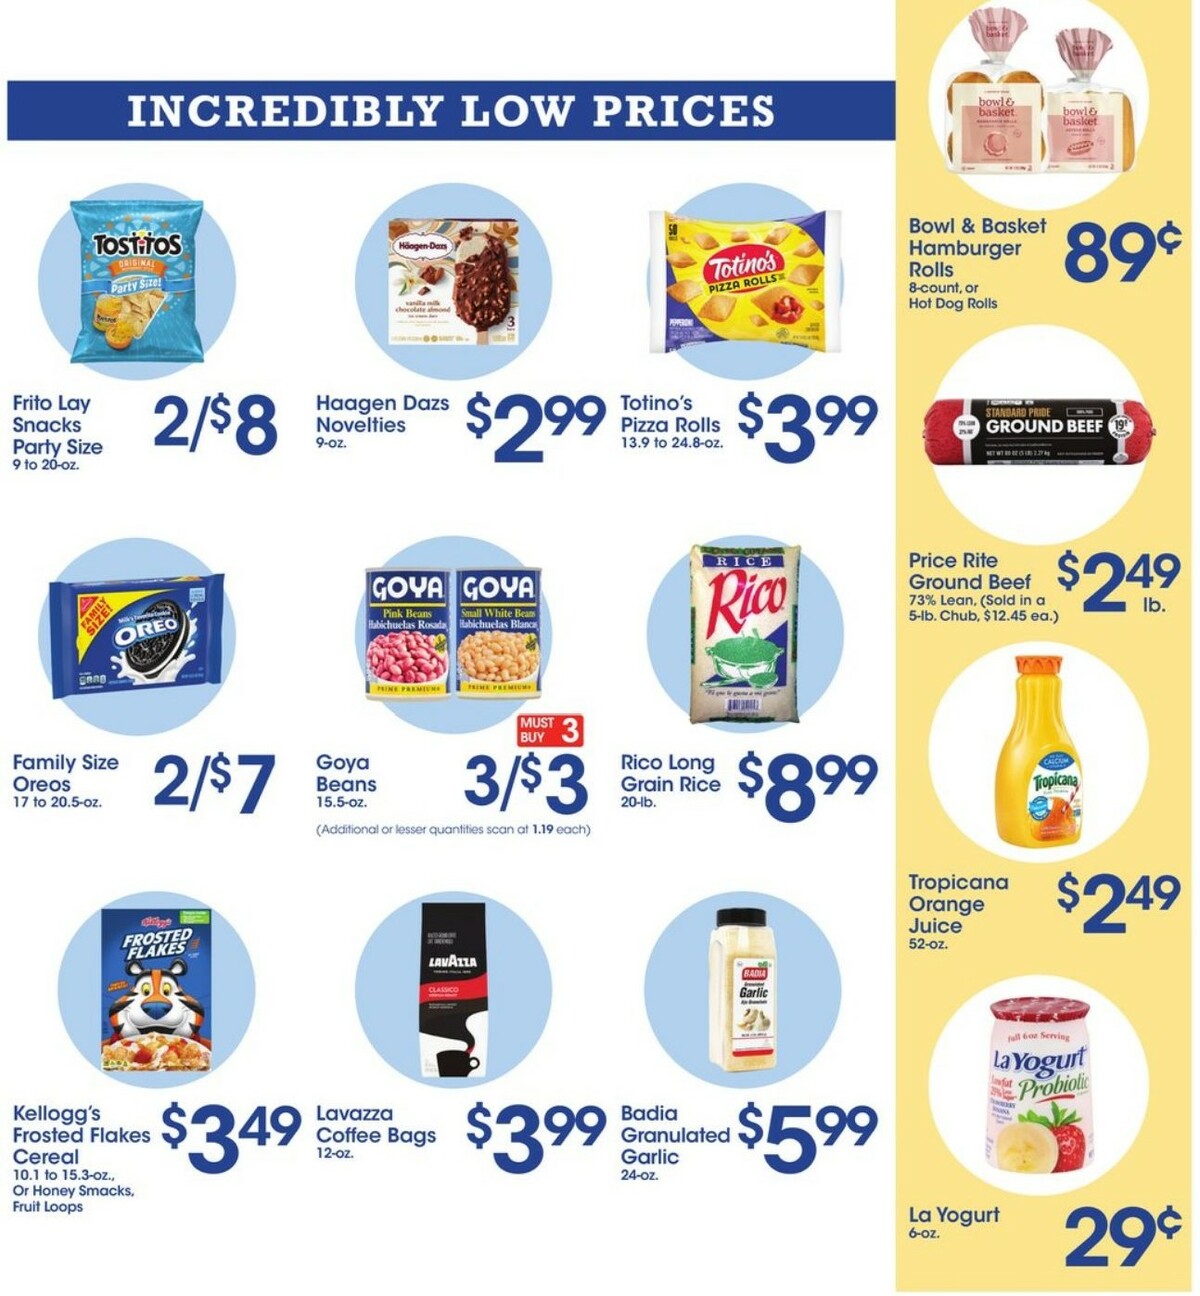 Price Rite Weekly Ad from August 5